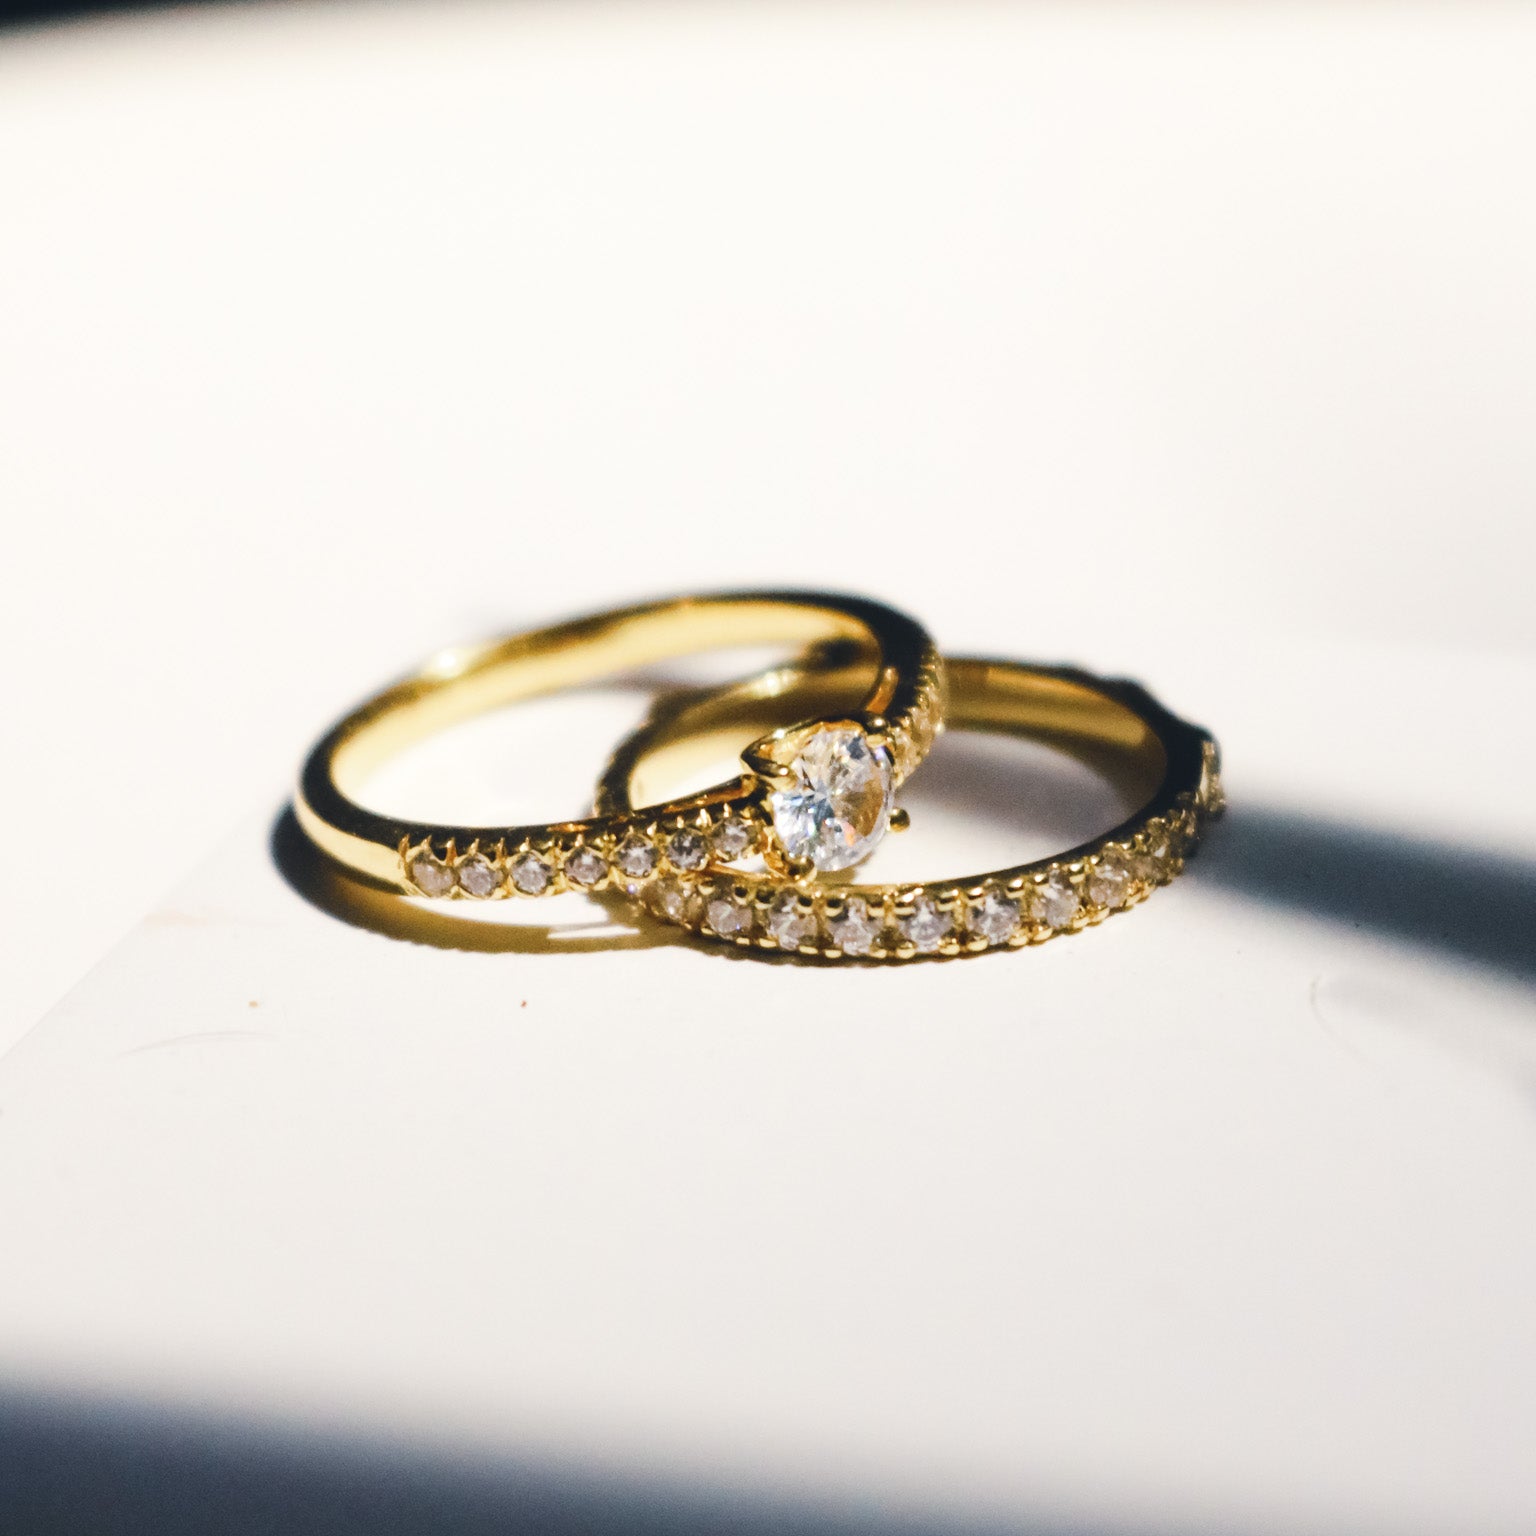 How to find the perfect wedding ring: What do you do first?